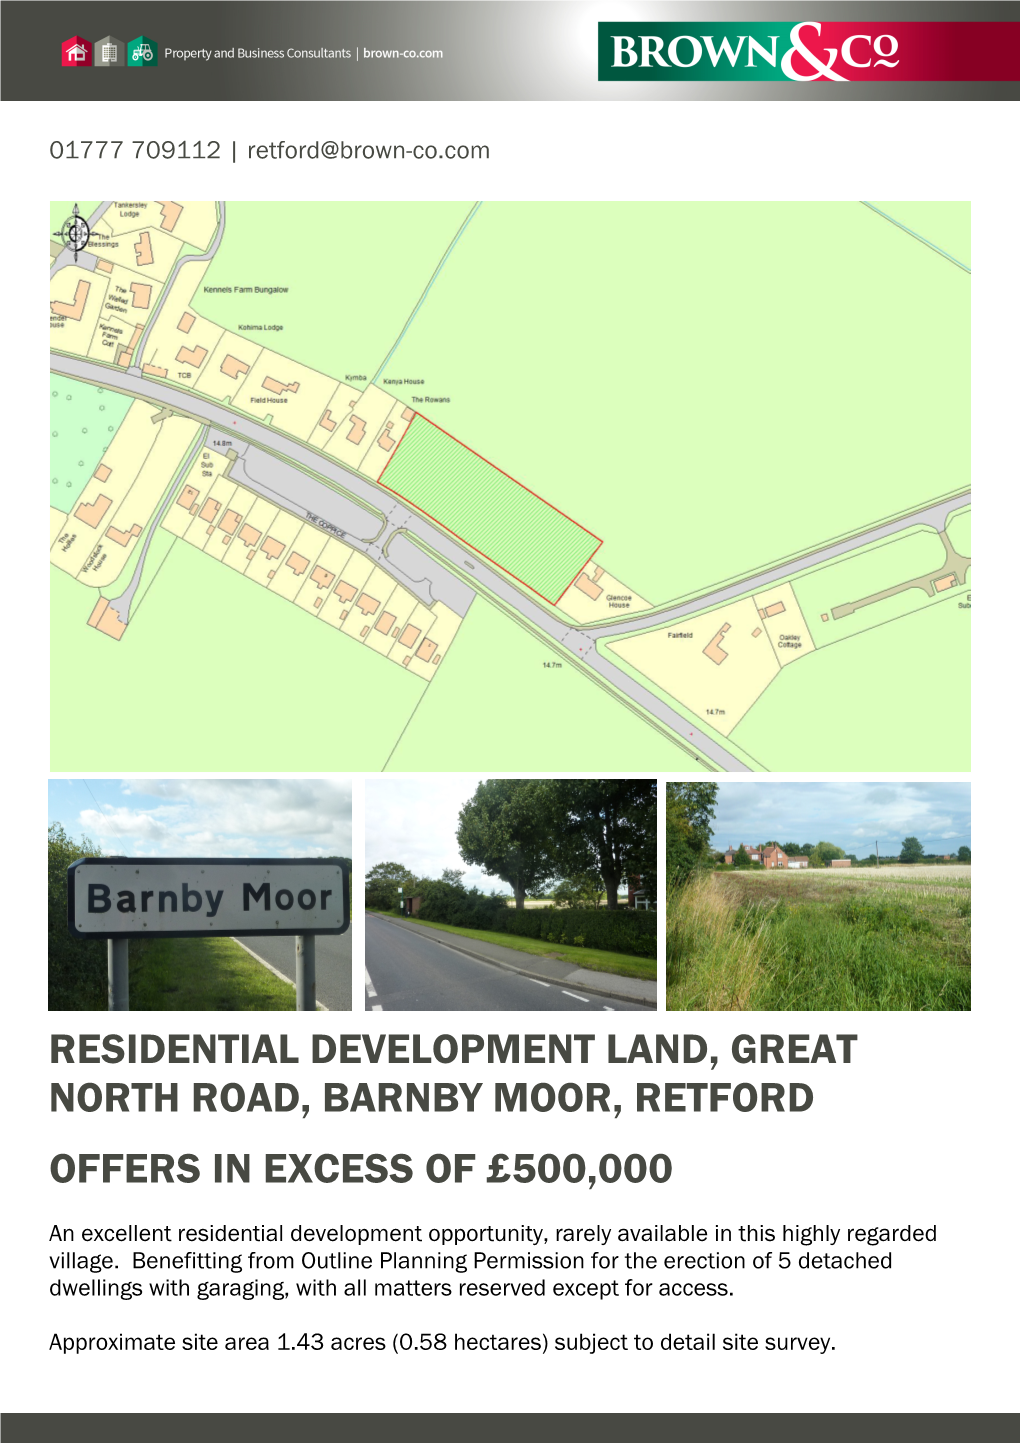 Residential Development Land, Great North Road, Barnby Moor, Retford £ Offers in Excess of £500,000